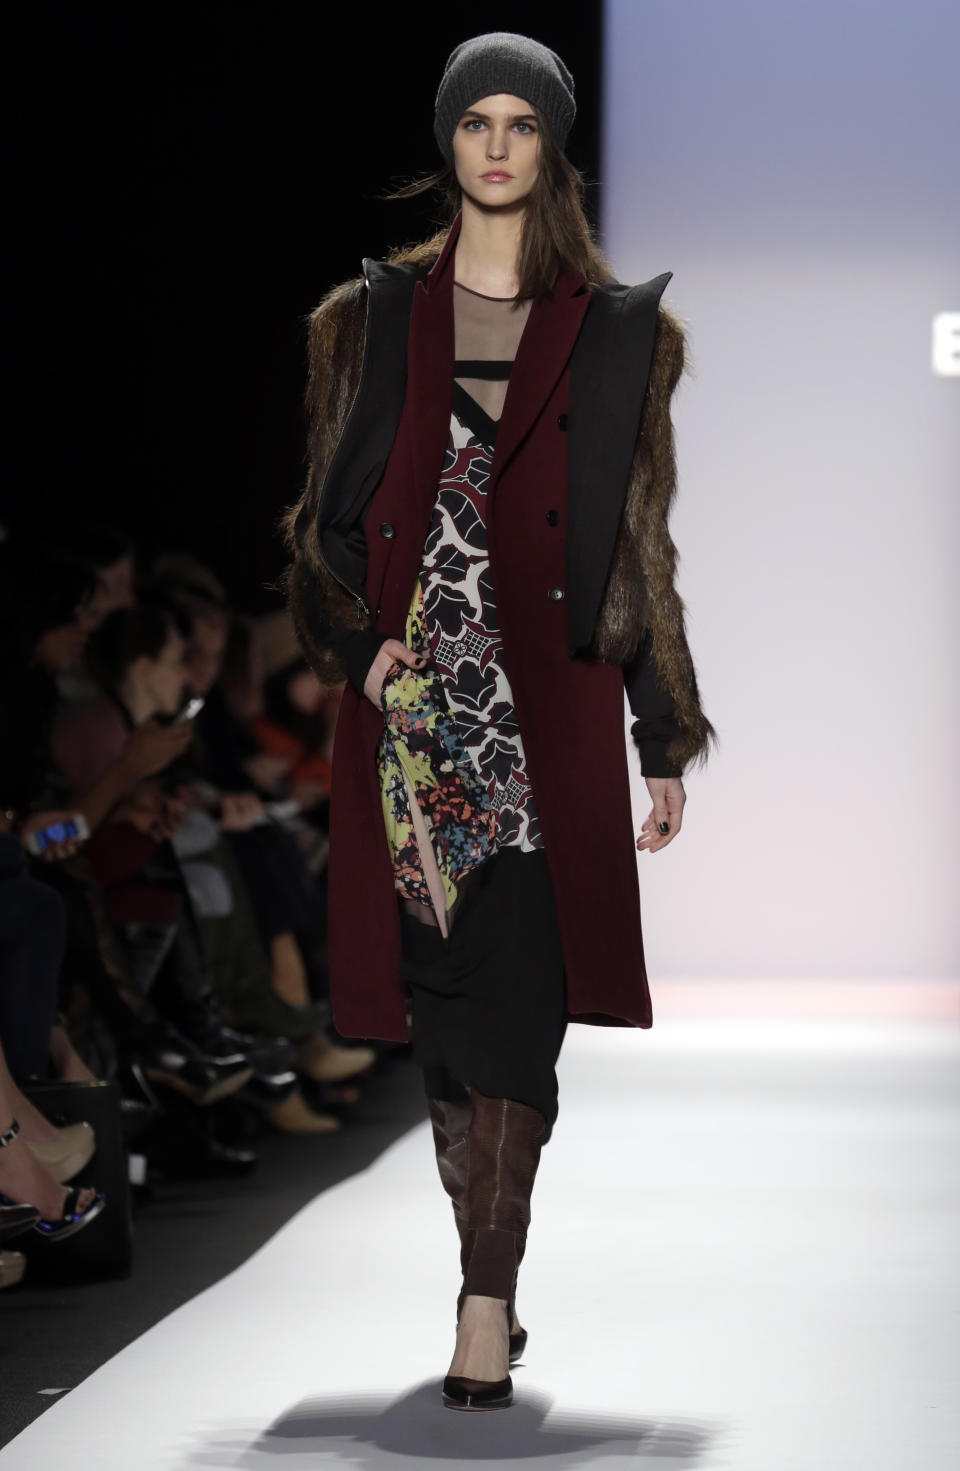 The BCBG Max Azria Fall 2013 collection is modeled during Fashion Week in New York on Thursday, Feb. 7, 2013. (AP Photo/Richard Drew)